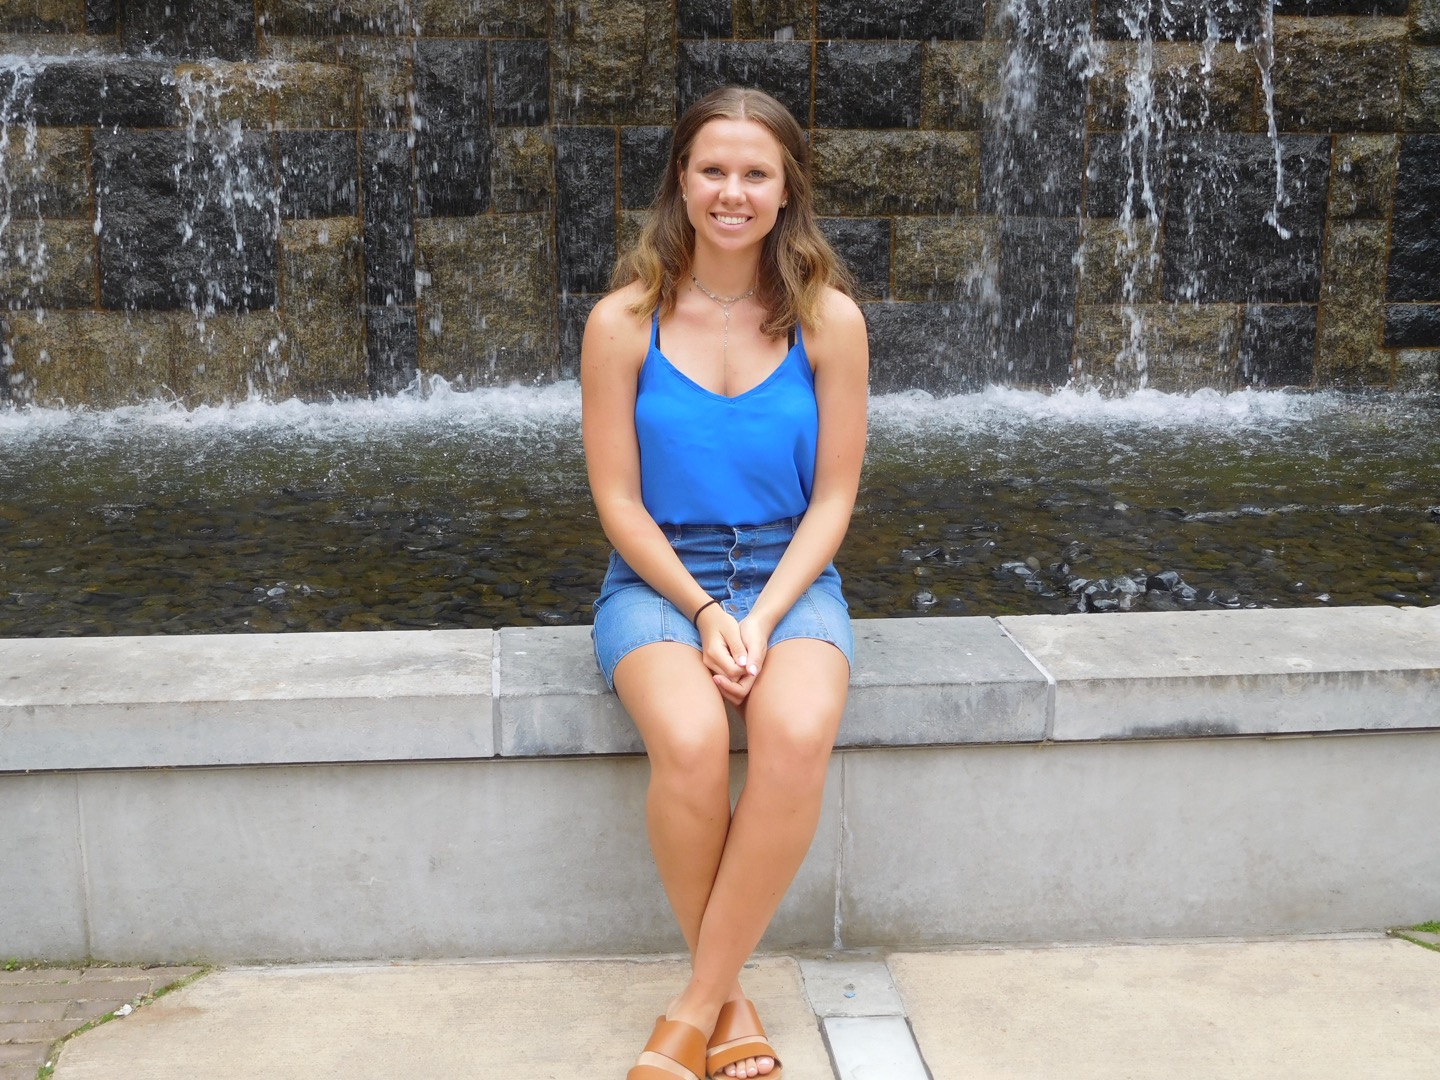 Pictured is Alexandra Gradwell, sports, arts and entertainment management major